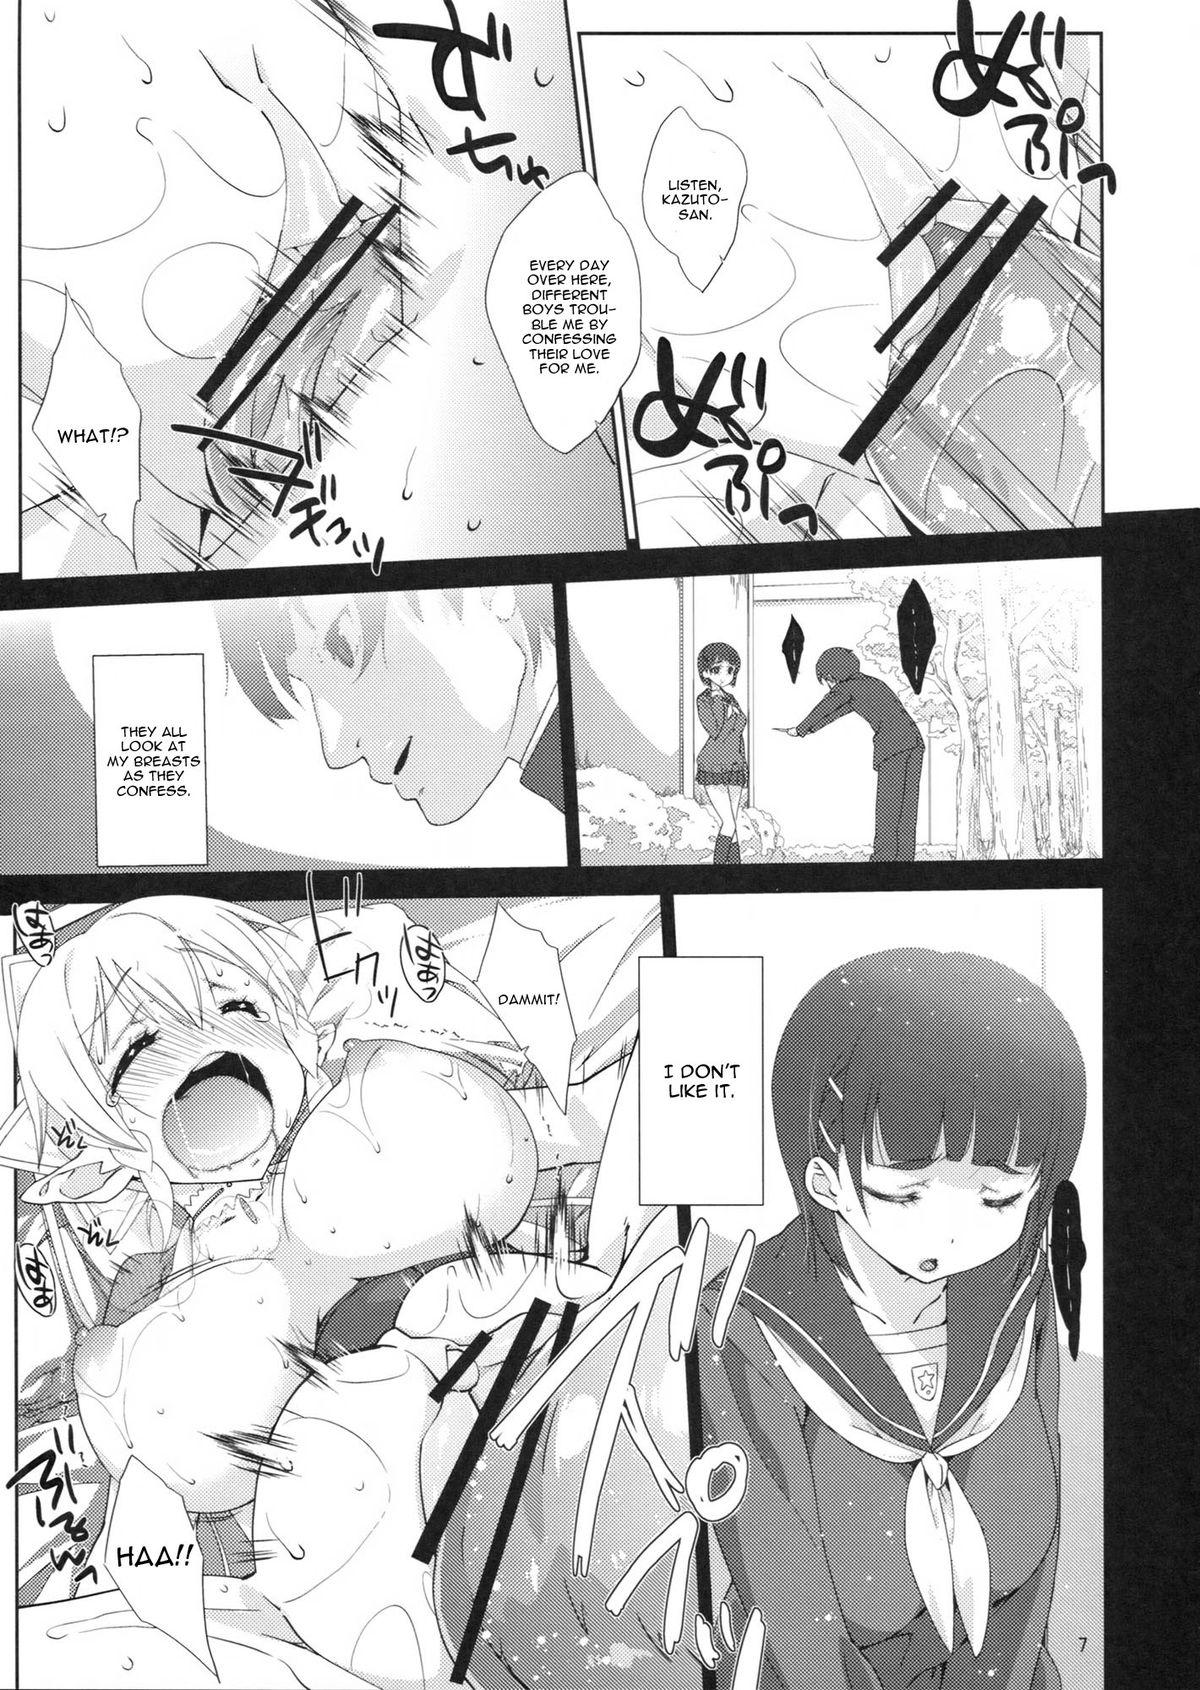 Juicy Suguha Route. - Sword art online Missionary Porn - Page 6